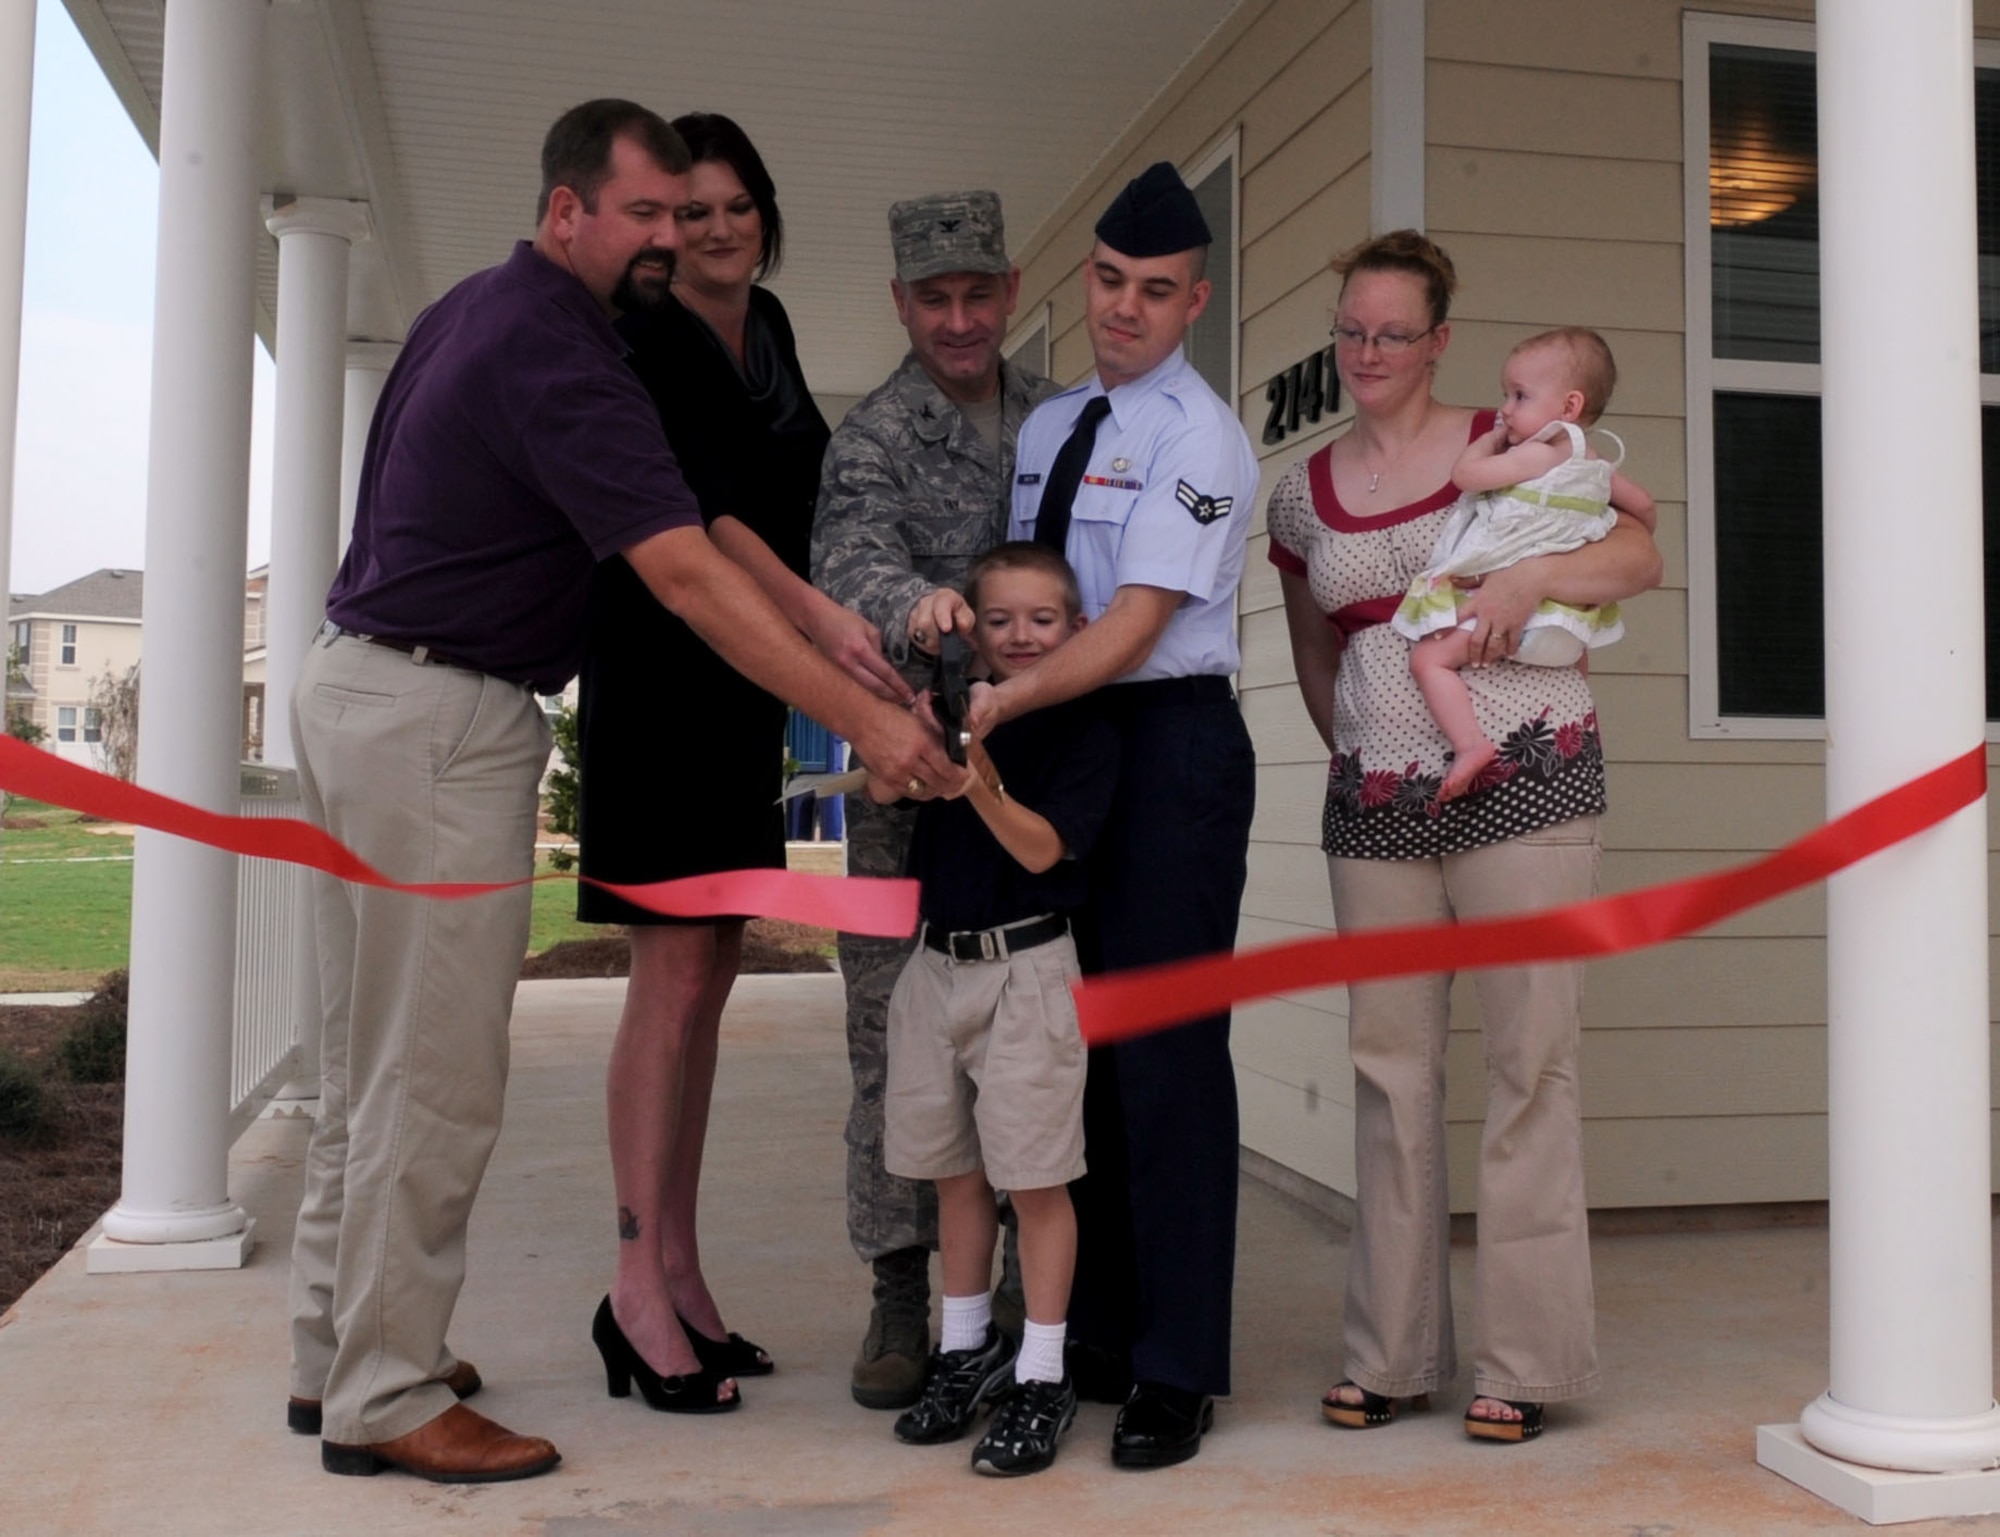 BARKSDALE AIR FORCE BASE, La. --  (From left to right) Matt Hoel, Hunt project manager, Elizabeth Kirkpatrick, Pinnacle investor and Col. Timothy Fay, 2d Bomb Wing commander assist the Boston family, Airman 1st class Gary and Helena, children Gary Jr., 6 and Annie, 11months, wtih the ribbon cutting of their newly three bedroom duplex home Aug. 18.The Boston family is one of 97 families to move into the Liberty Heights housing area. (U.S. Air Force photo by Senior Airman La'Shanette V. Garrett) (RELEASED)